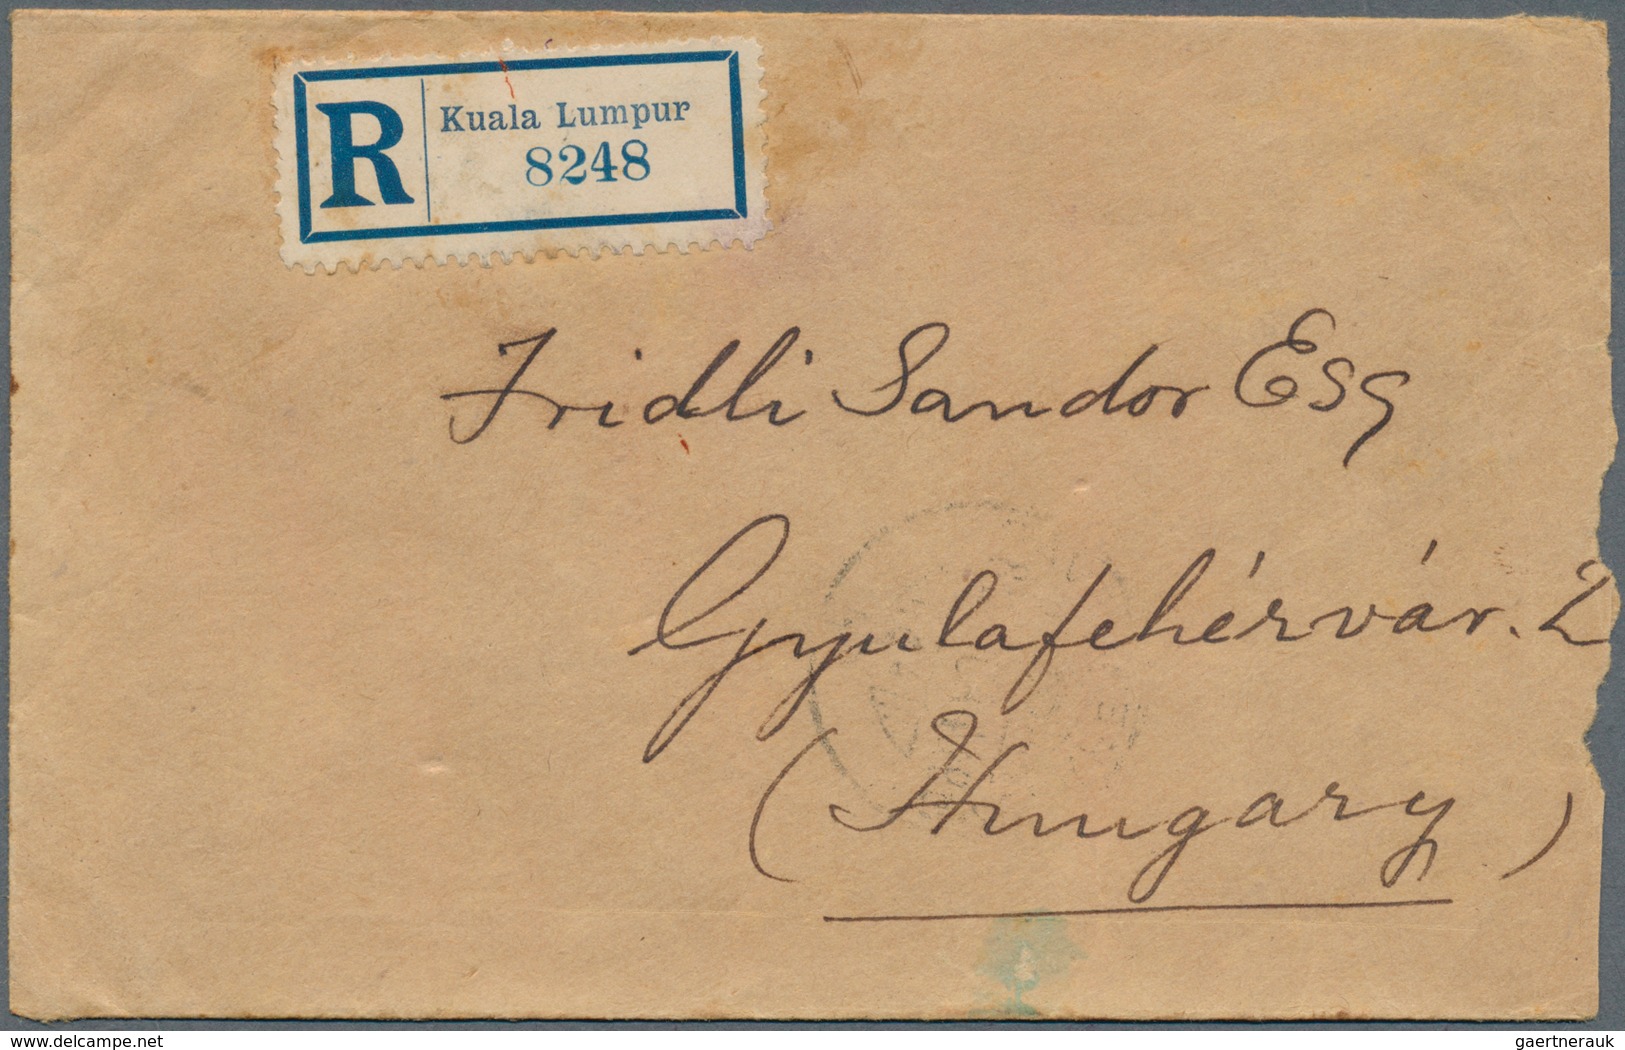 Malaiische Staaten - Selangor: 1914 (13.7.), Registered Cover Franked On Reverse With FMS Tiger 8c. - Selangor